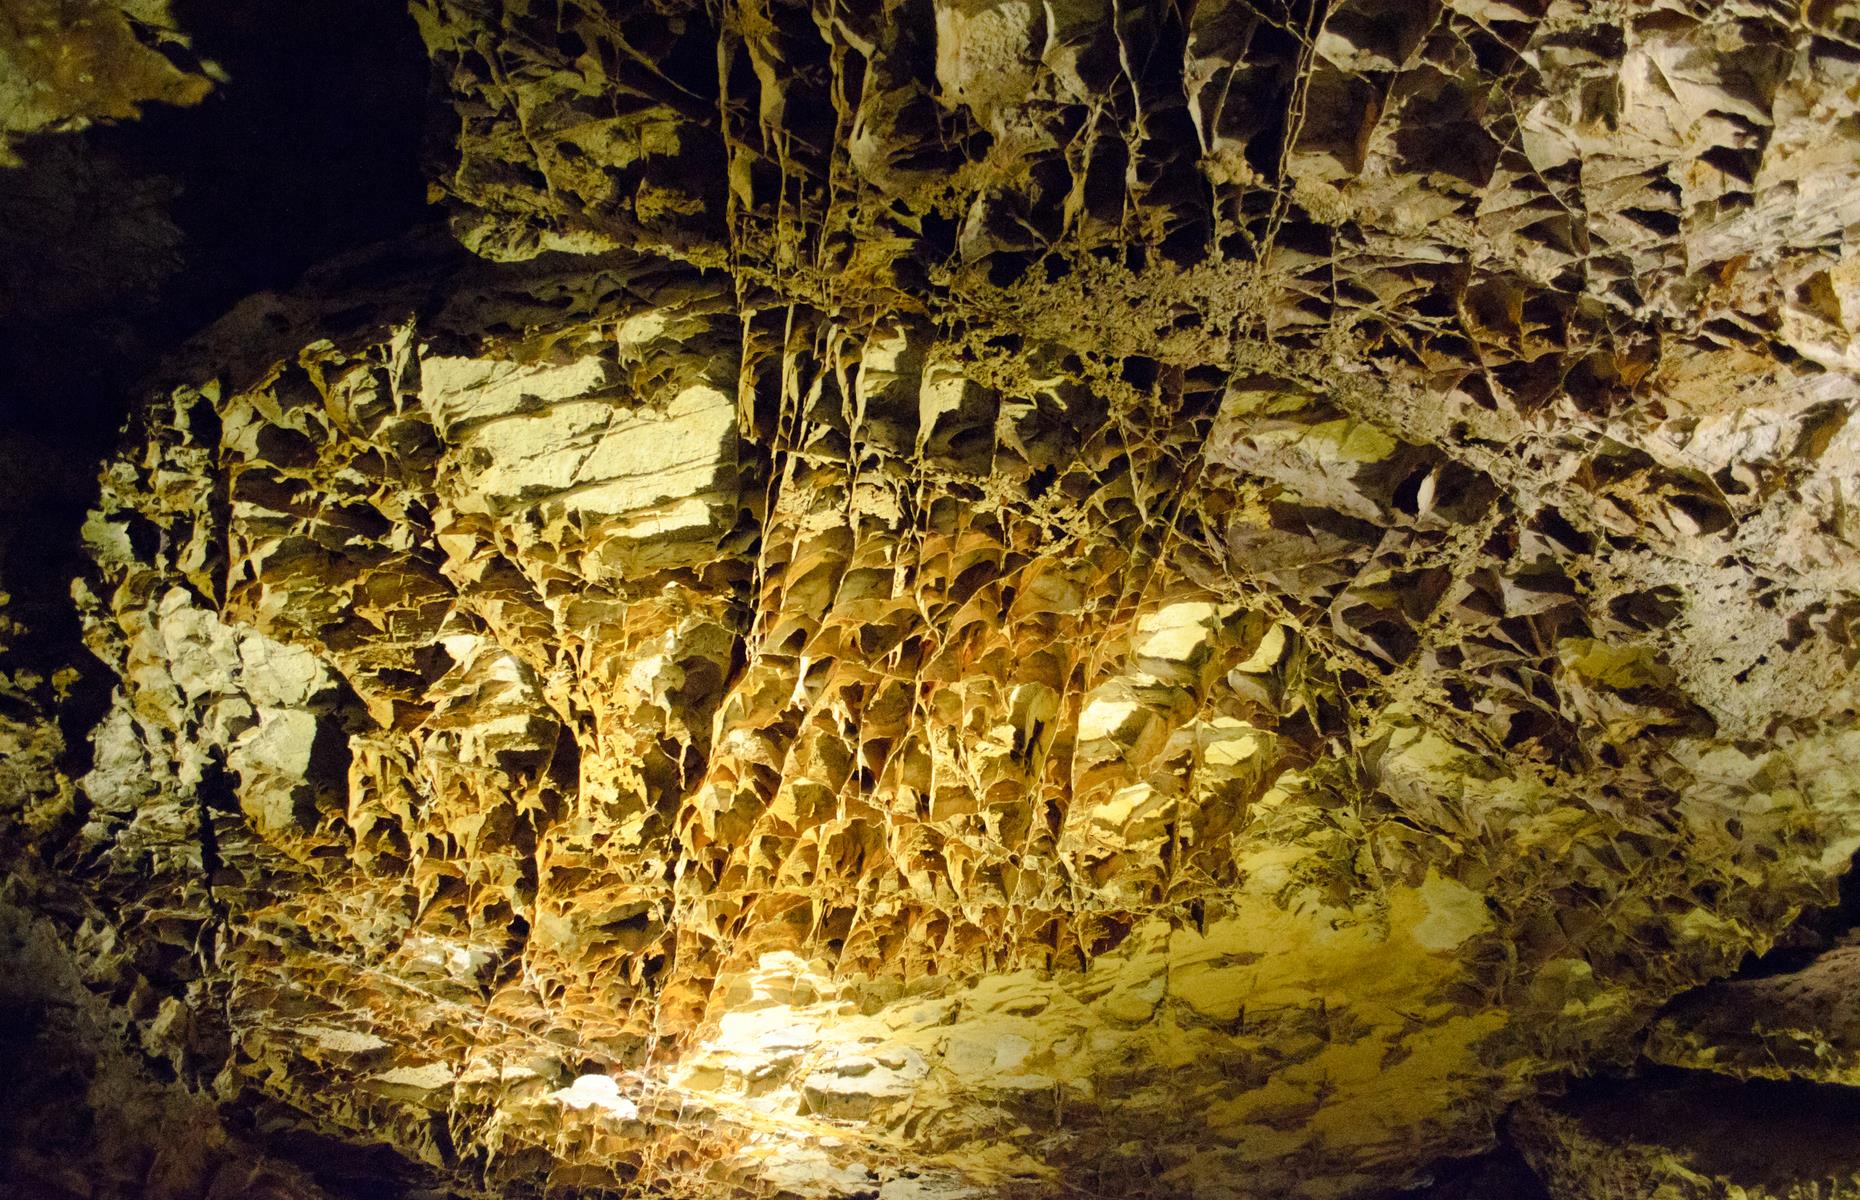 <p>Deep under the South Dakota grasslands is Wind Cave, one of the world’s longest cave networks. Here, the oldest rock formations date back some 310 million years and powerful winds blast in and out of the cavern mouth, causing a whistling noise. To date, over 123 miles (198km) of rocky passages have been explored and six lakes discovered. Here the big draw is boxwork, where calcite forms in an intricate honeycomb pattern. Cave access is currently closed due to elevator repairs; <a href="https://www.nps.gov/wica/index.htm">check the website</a> for updates.</p>